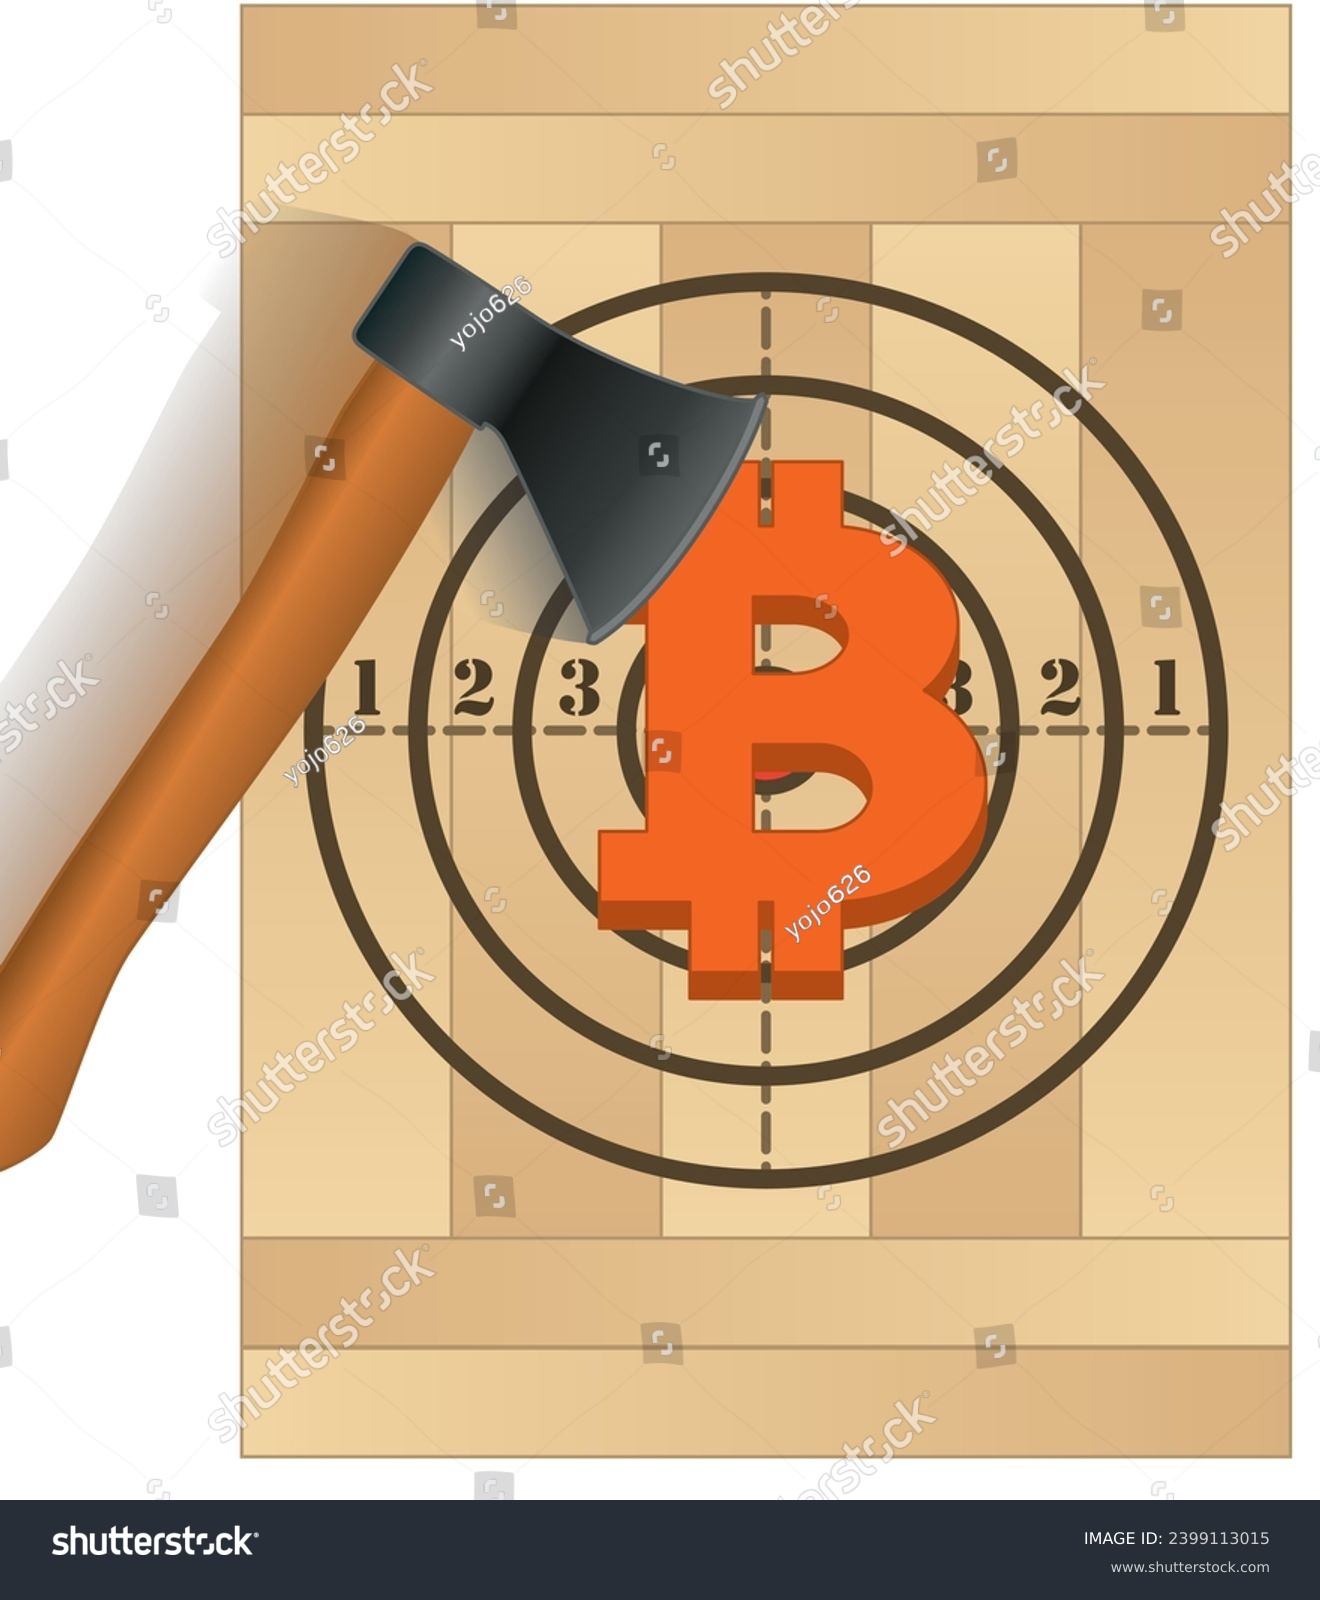 SVG of business, axe throwing showing motion aimed at bitcoin sign on target svg